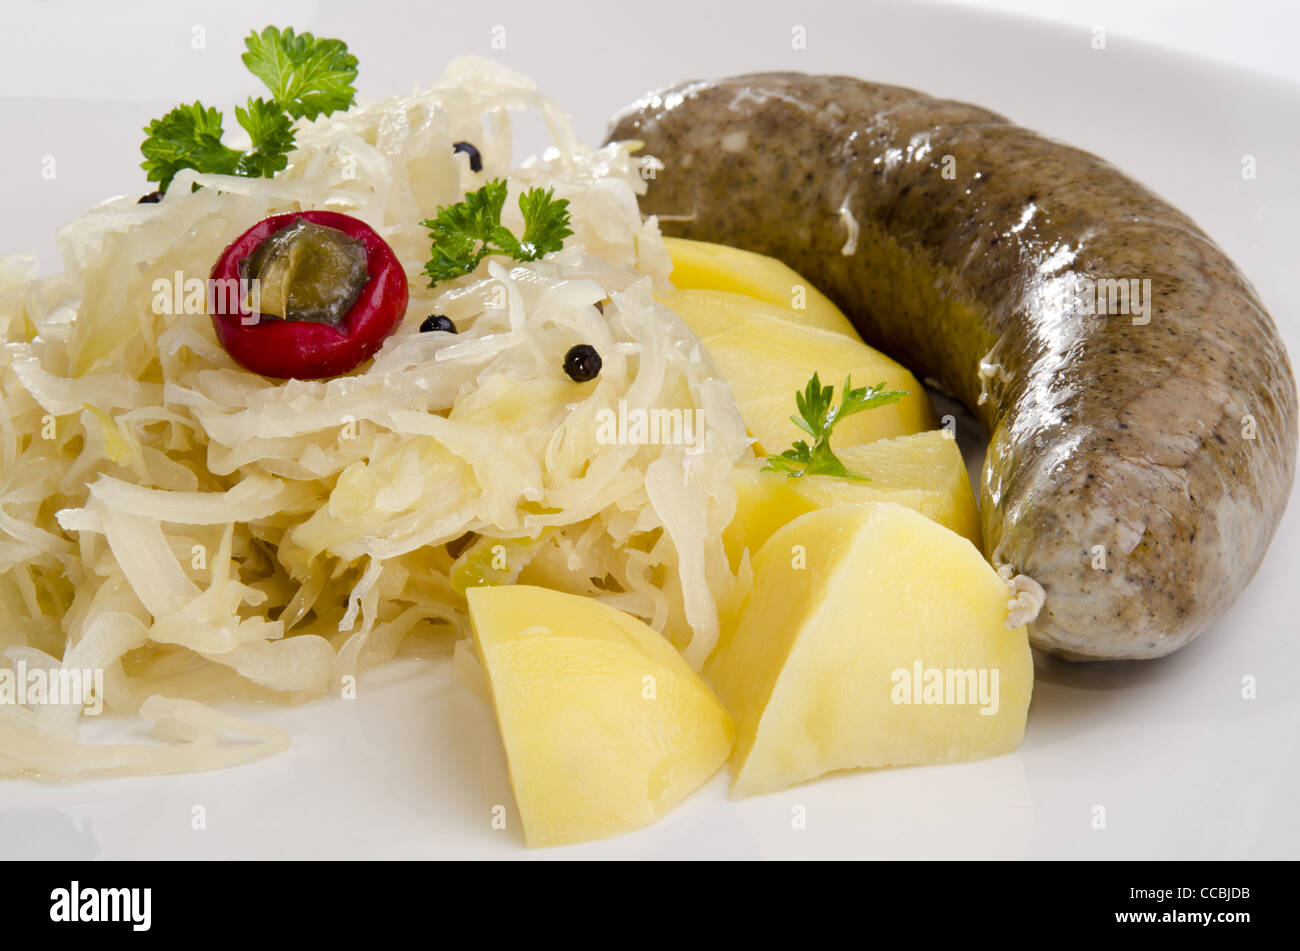 Steamed sauerkraut with grilled pork and potatoes Stock Photo